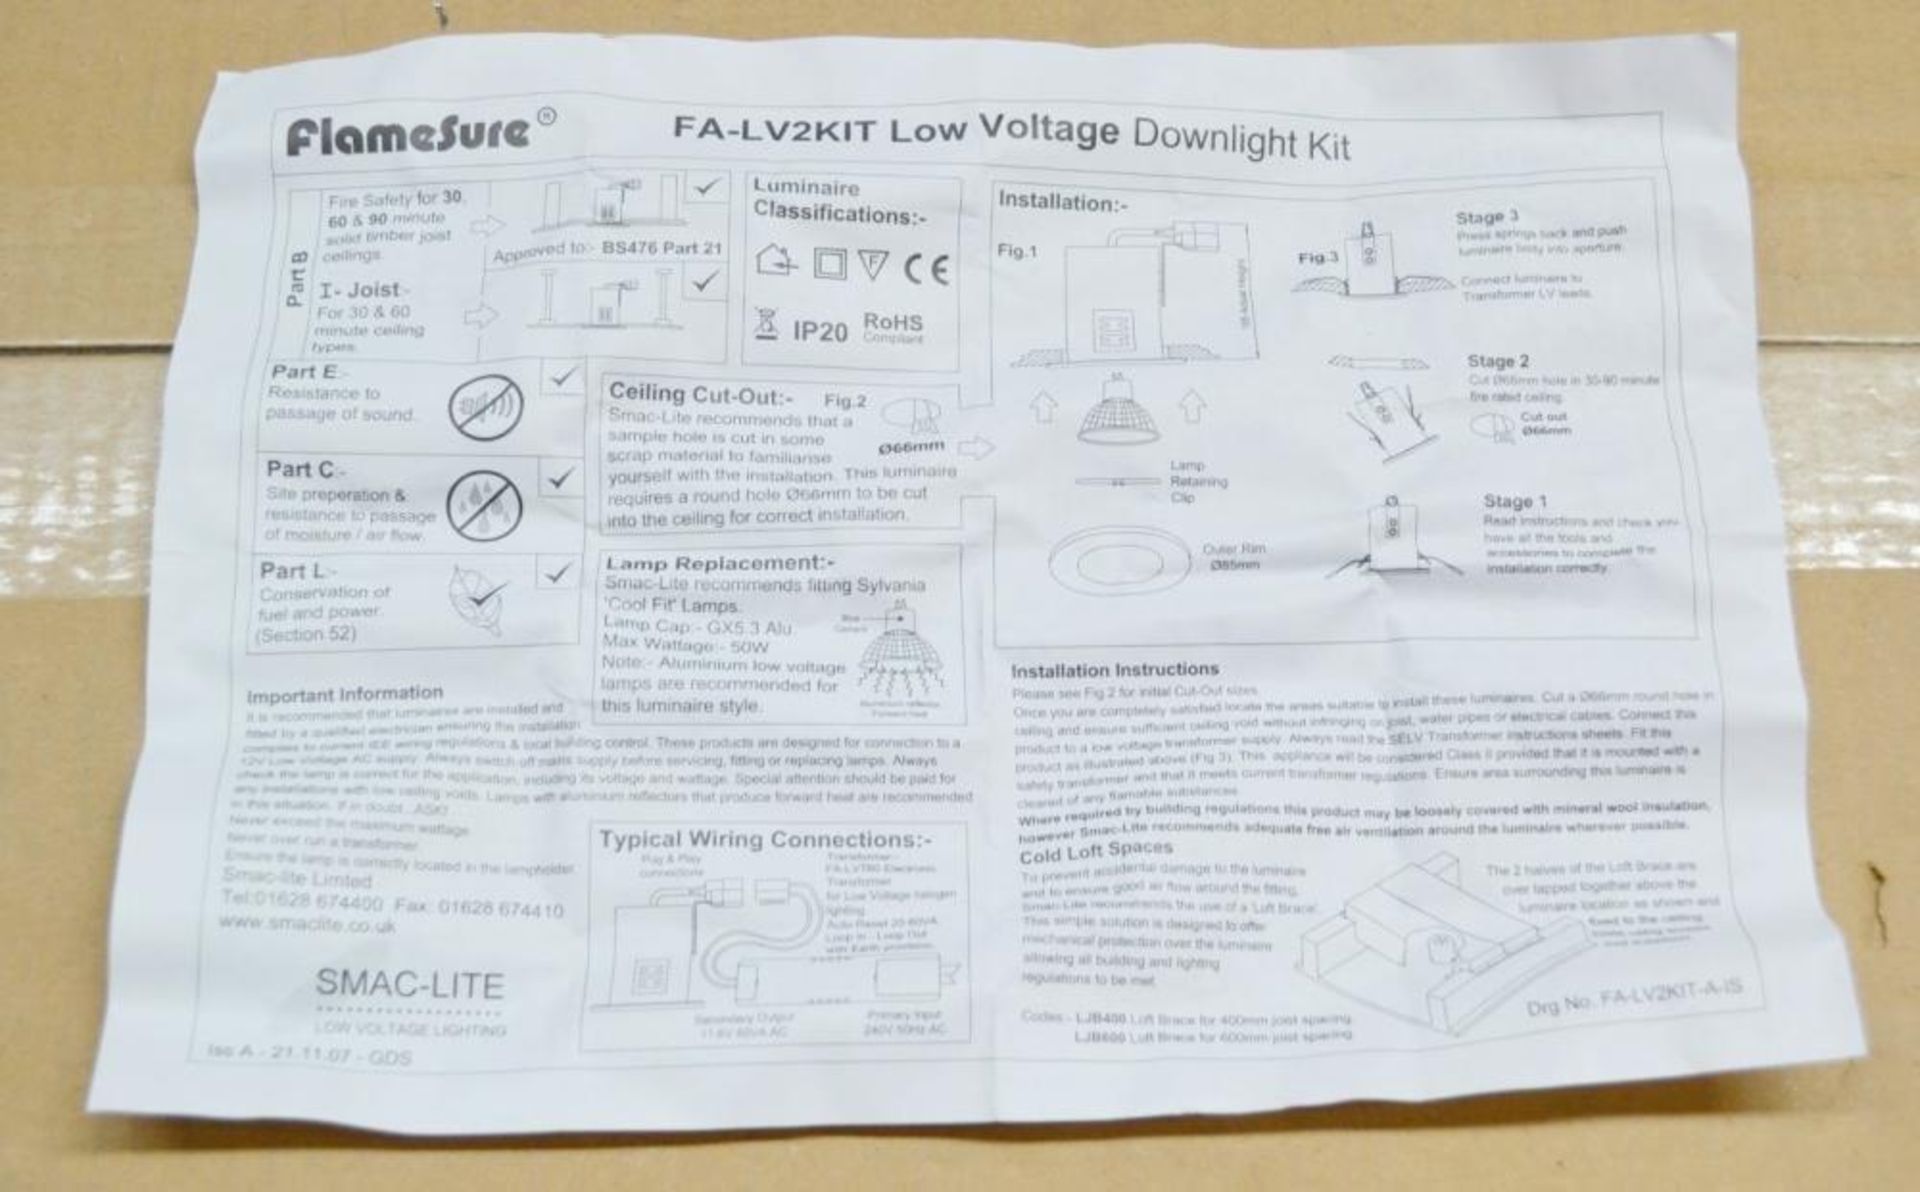 10 x Smac-lite FLAMESURE Low Voltage Fire Rated Downlight Kits - Model: FA-LV2KIT - IP20 - Includes - Image 9 of 9